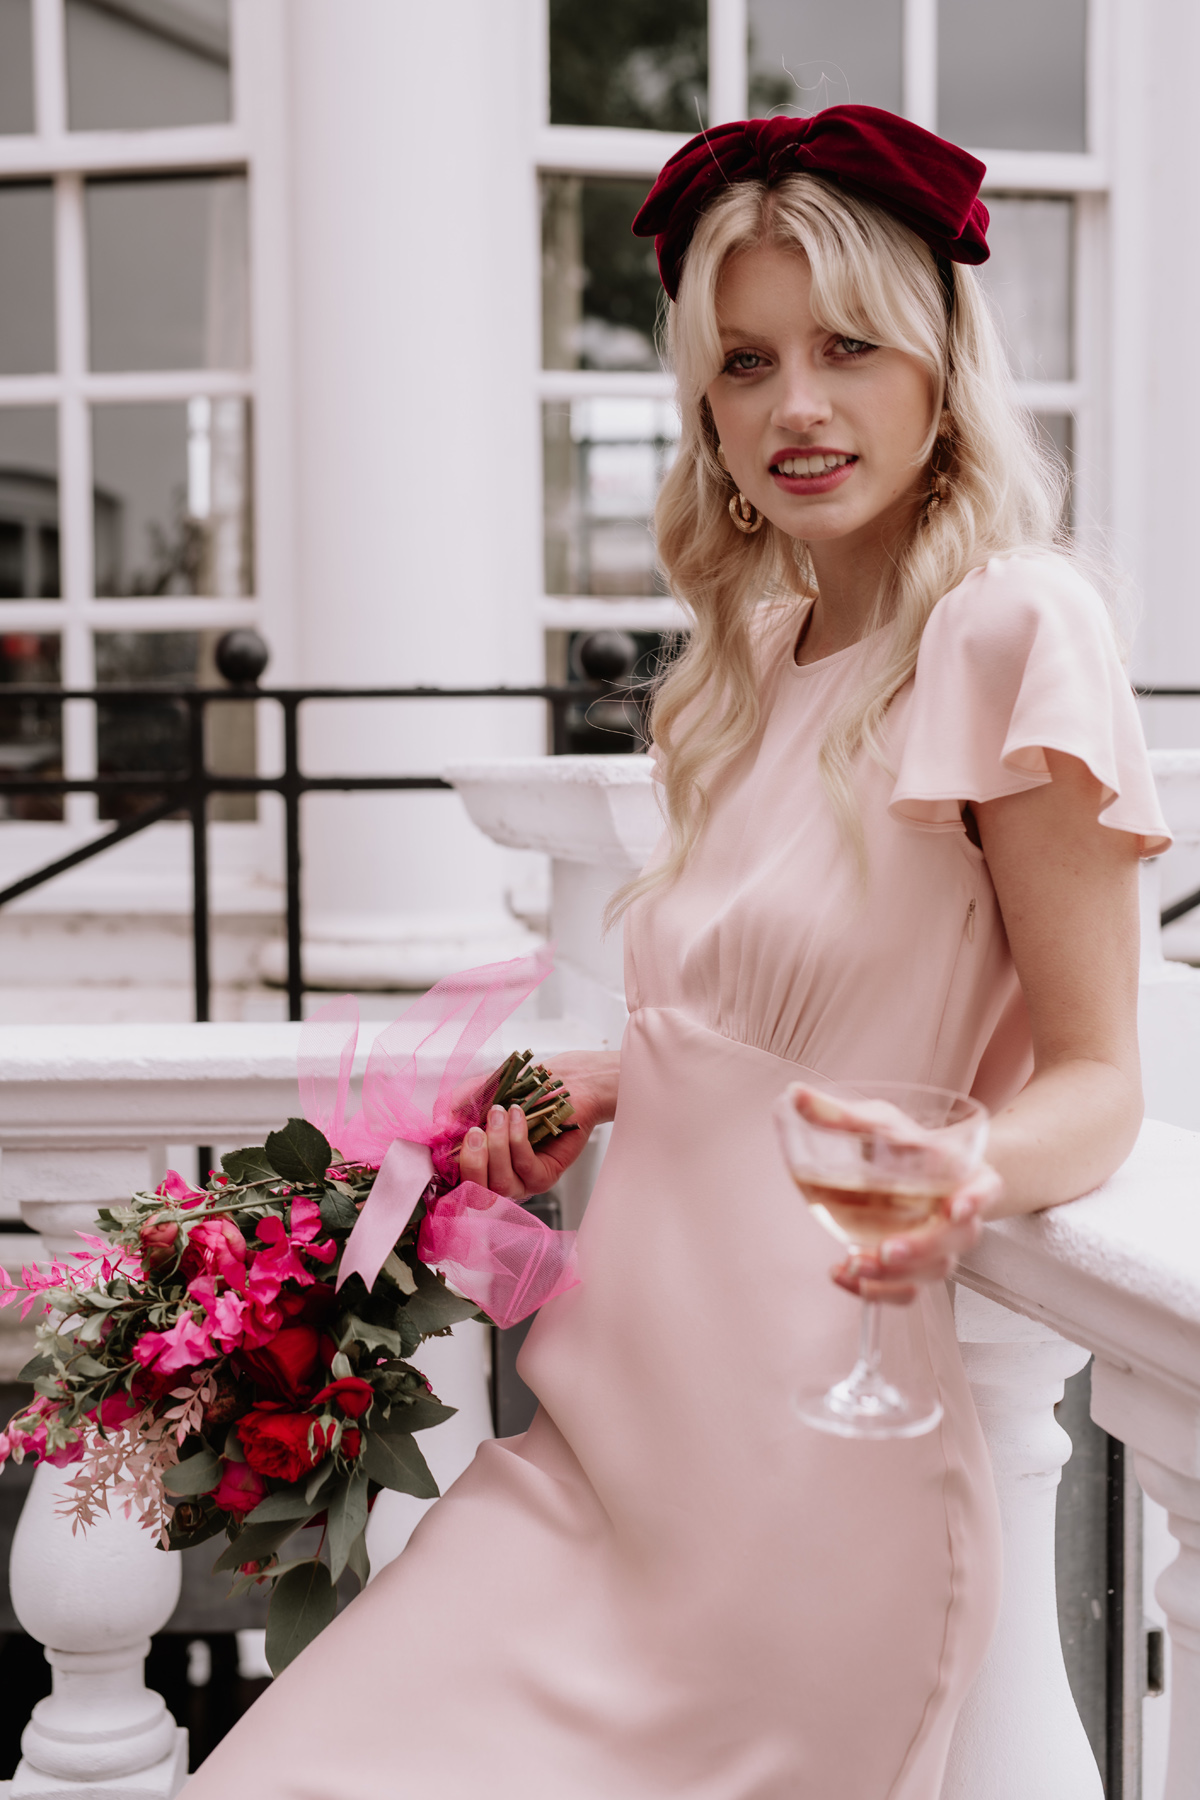 Pale pink bridesmaids dresses - Maids to Measure